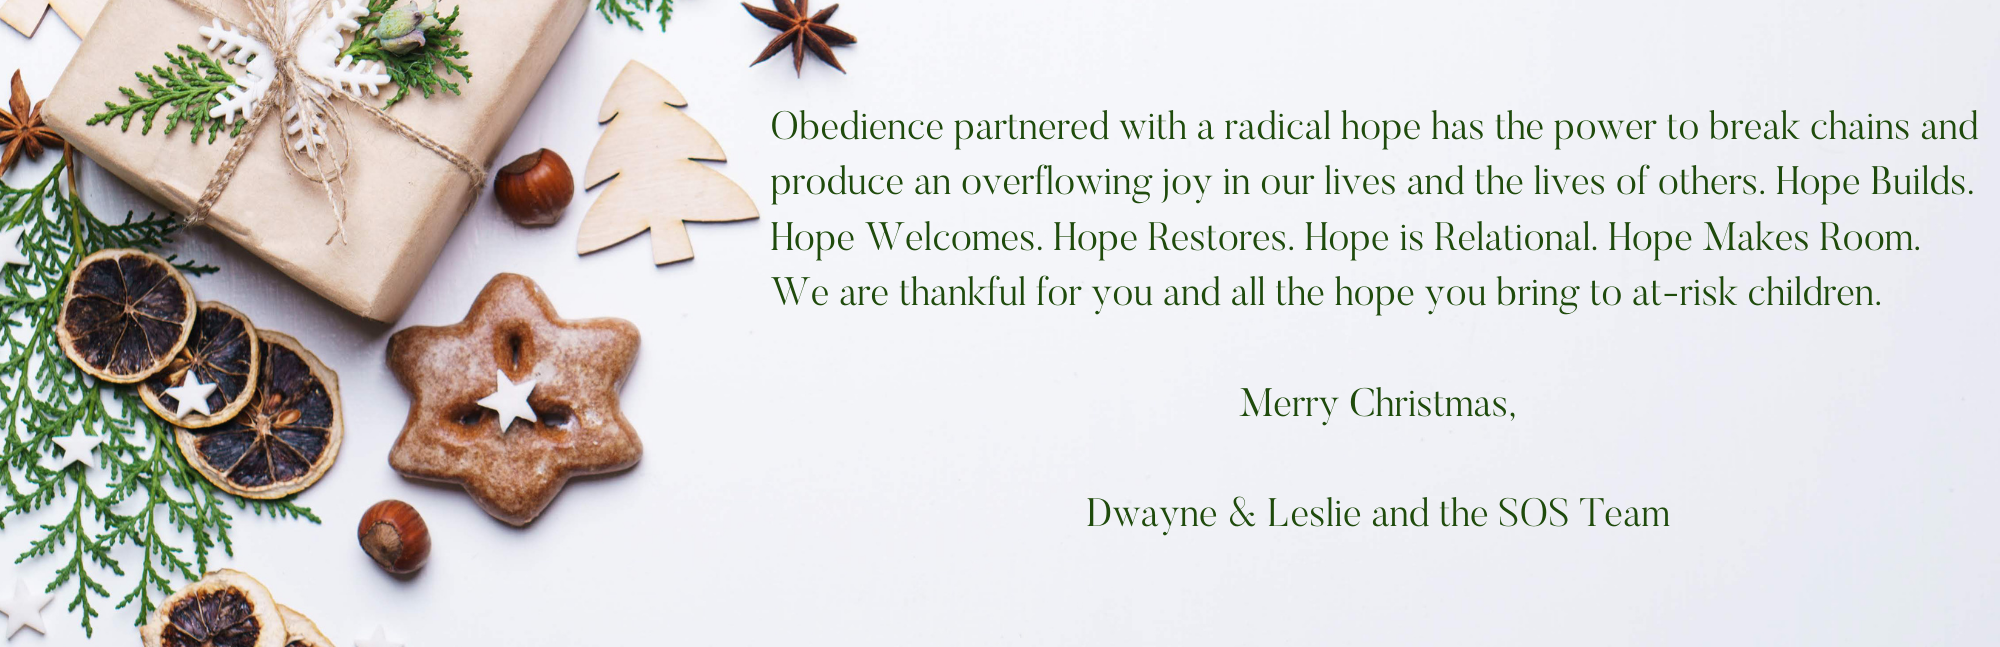 Obedience partnered with a radical hope has the power to break chains and produce an overflowing joy in our lives and the lives of others. Hope Builds. Hope Welcomes. Hope Restores. Hope is Relational. Hope Makes Room. We are thankful for you and all the hope you bring to at-risk children.